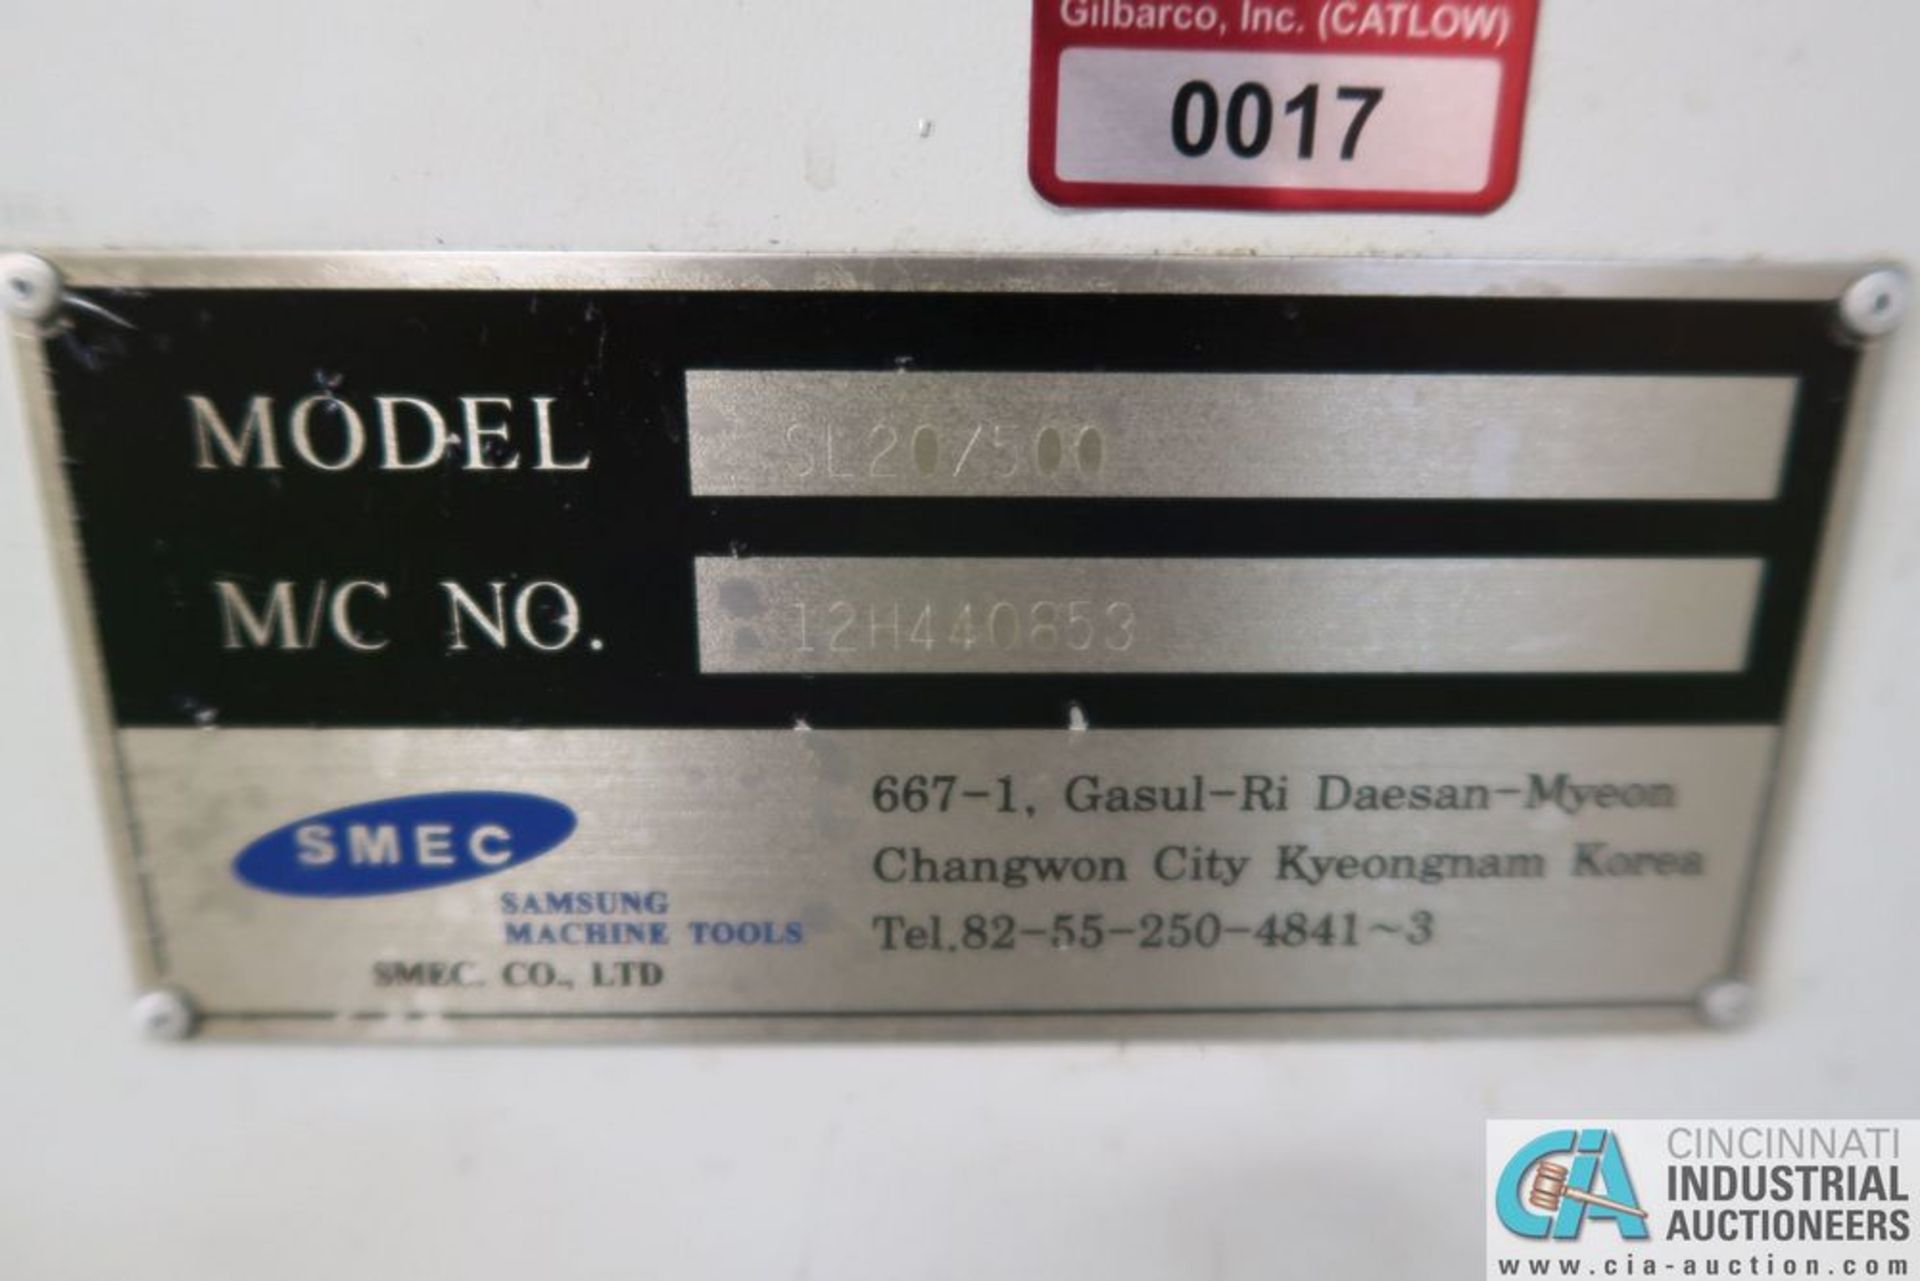 SAMSUNG SL20/500 CNC TURNING CENTER; S/N 12H440853, 8" 3-JAW CHUCK, **Rigging Fee Due $500.00** - Image 14 of 14